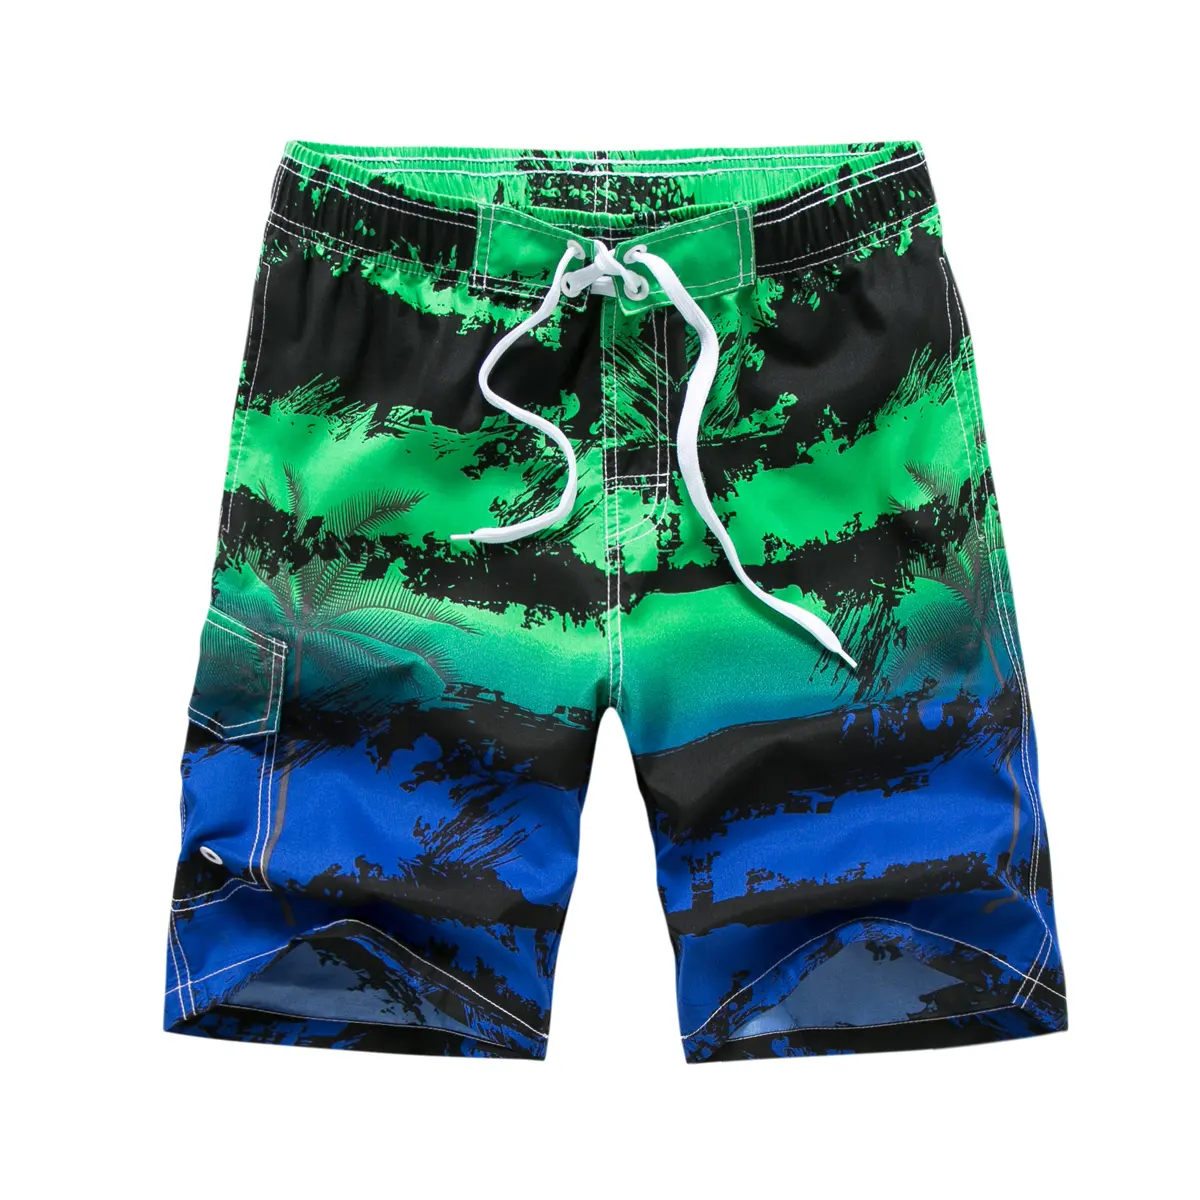 Hot selling Mens printing Quick Dry Printed Short Swim Trunks with Mesh Lining Swimwear Bathing Suits